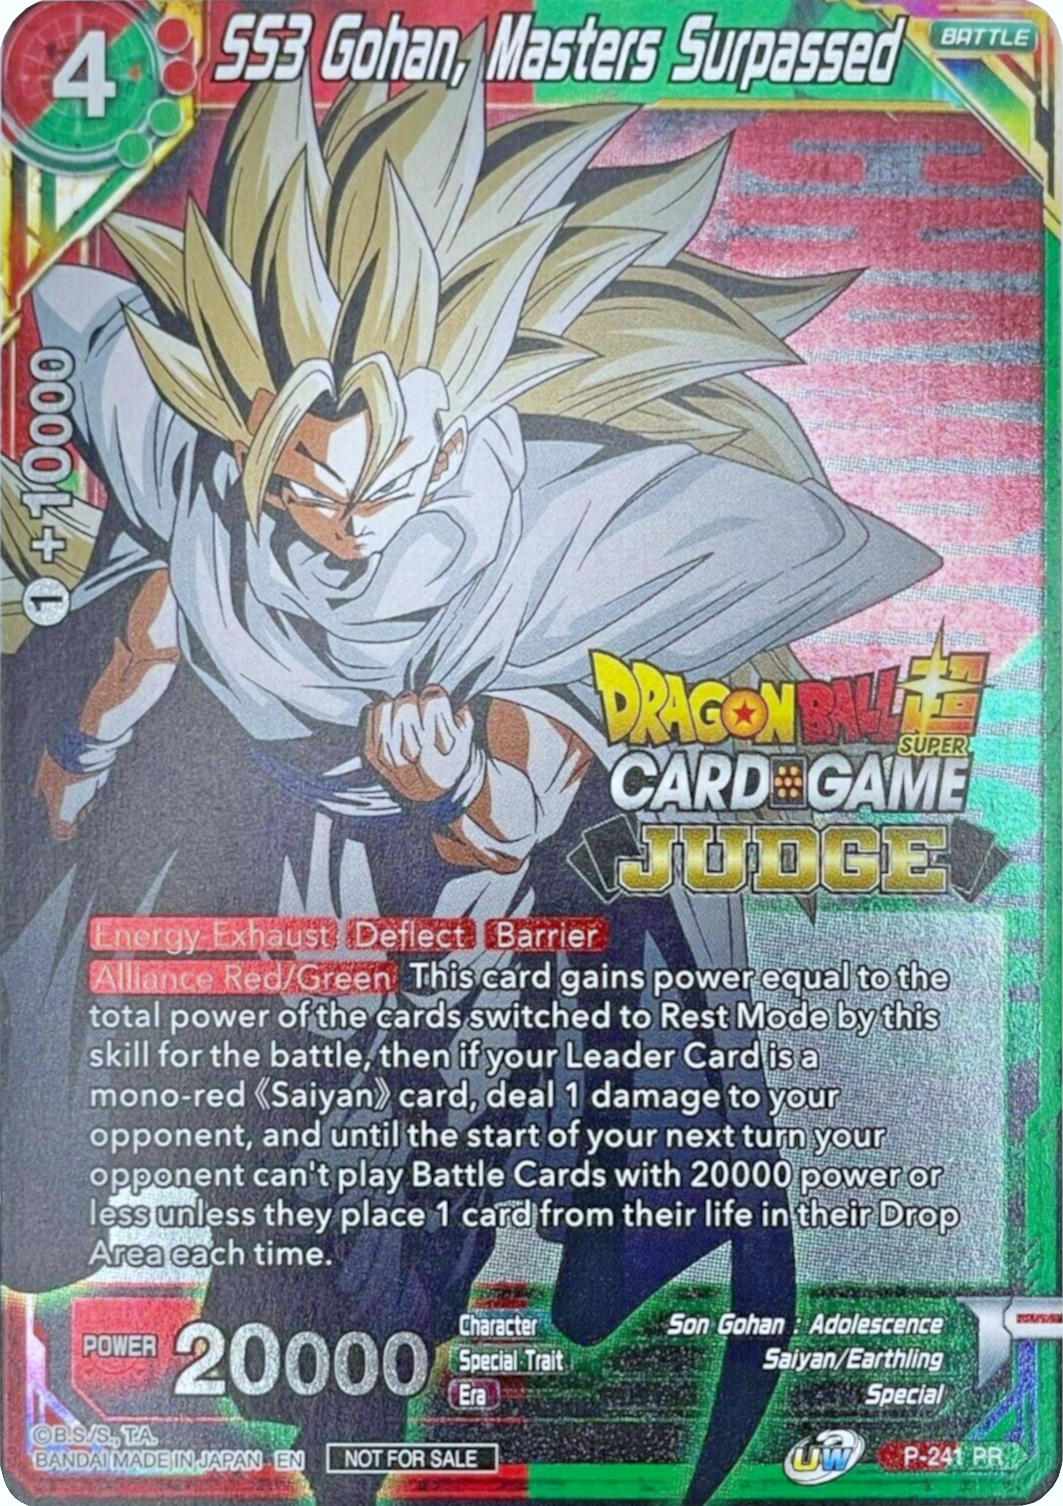 SS3 Gohan, Masters Surpassed (Level 2) (P-241) [Promotion Cards] | Mindsight Gaming